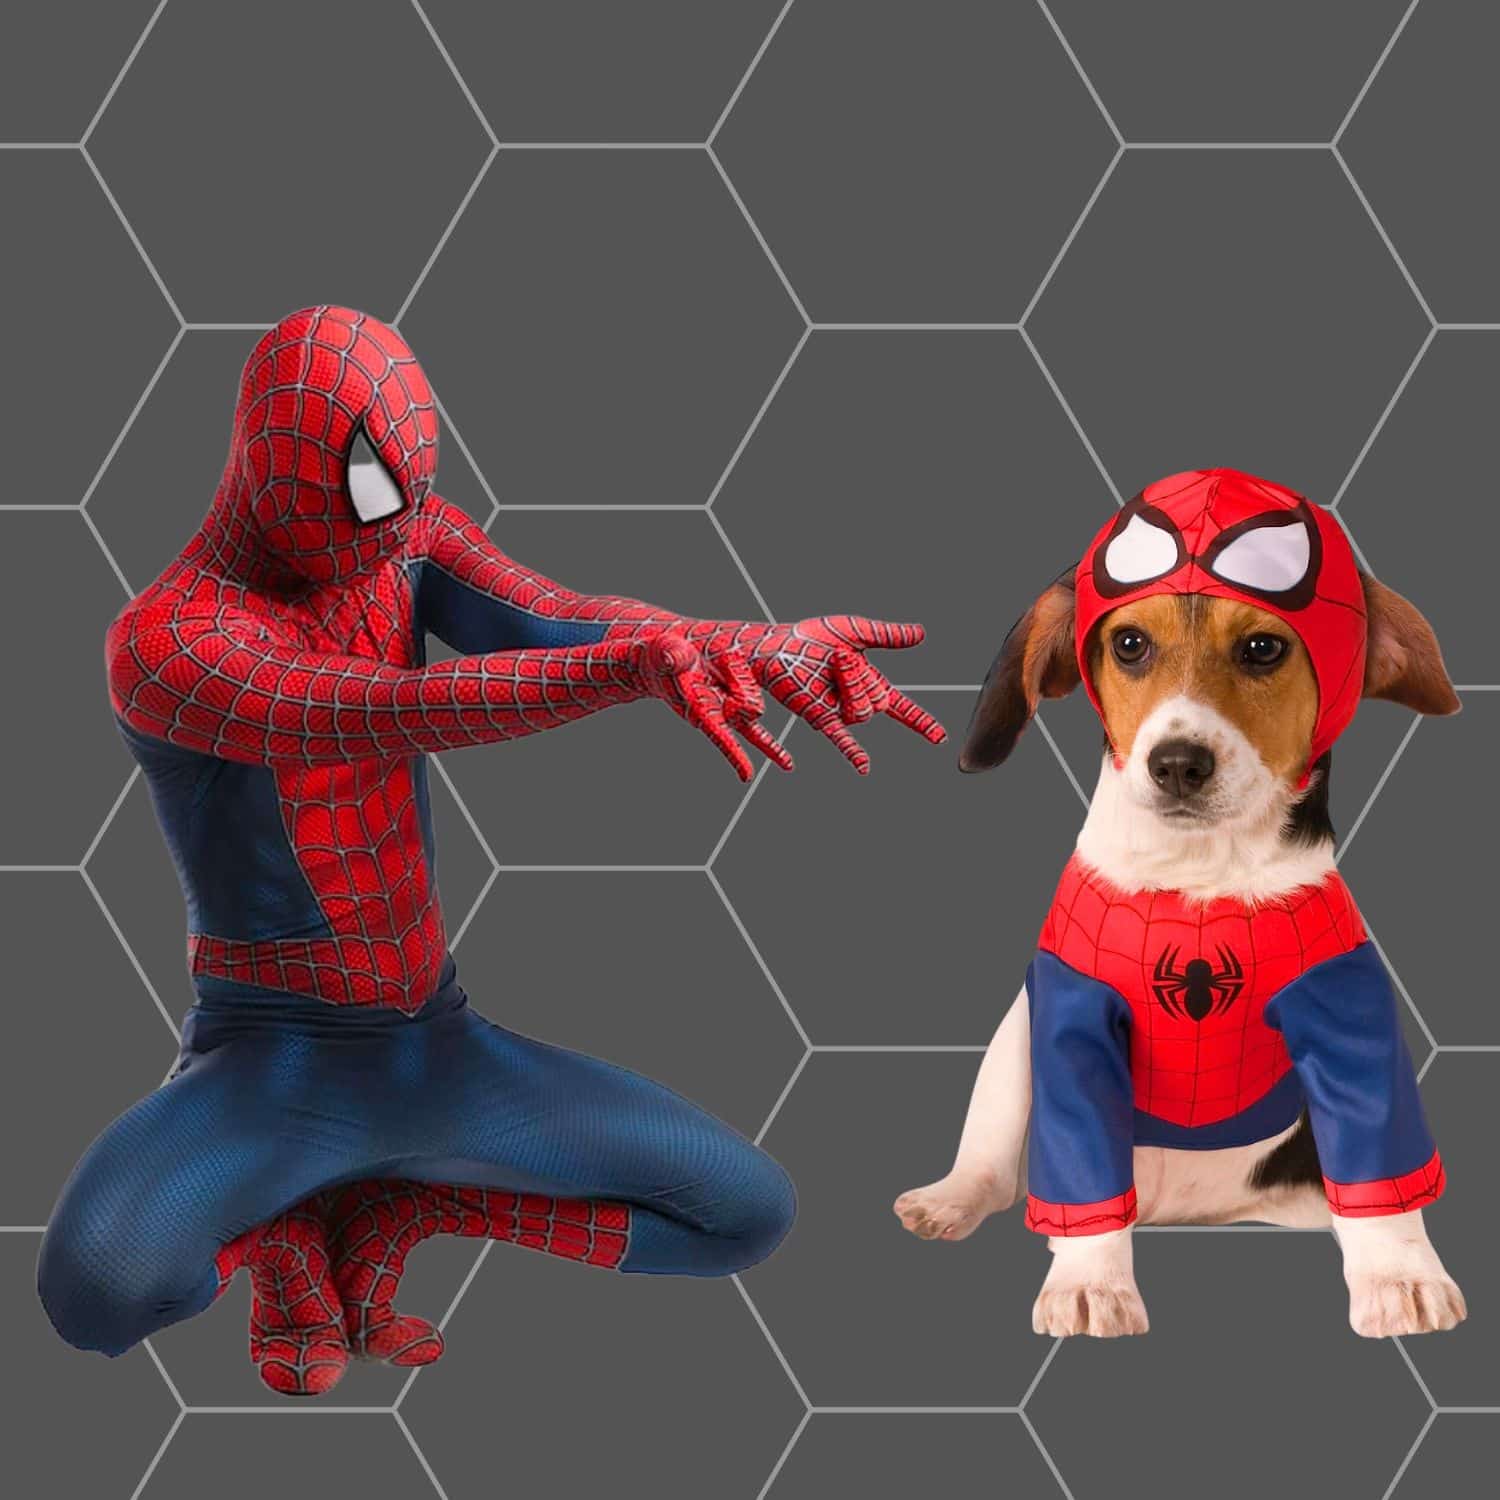 Dog and owner halloween costumes Spiderman - dog Christmas ornaments | PawCool ™